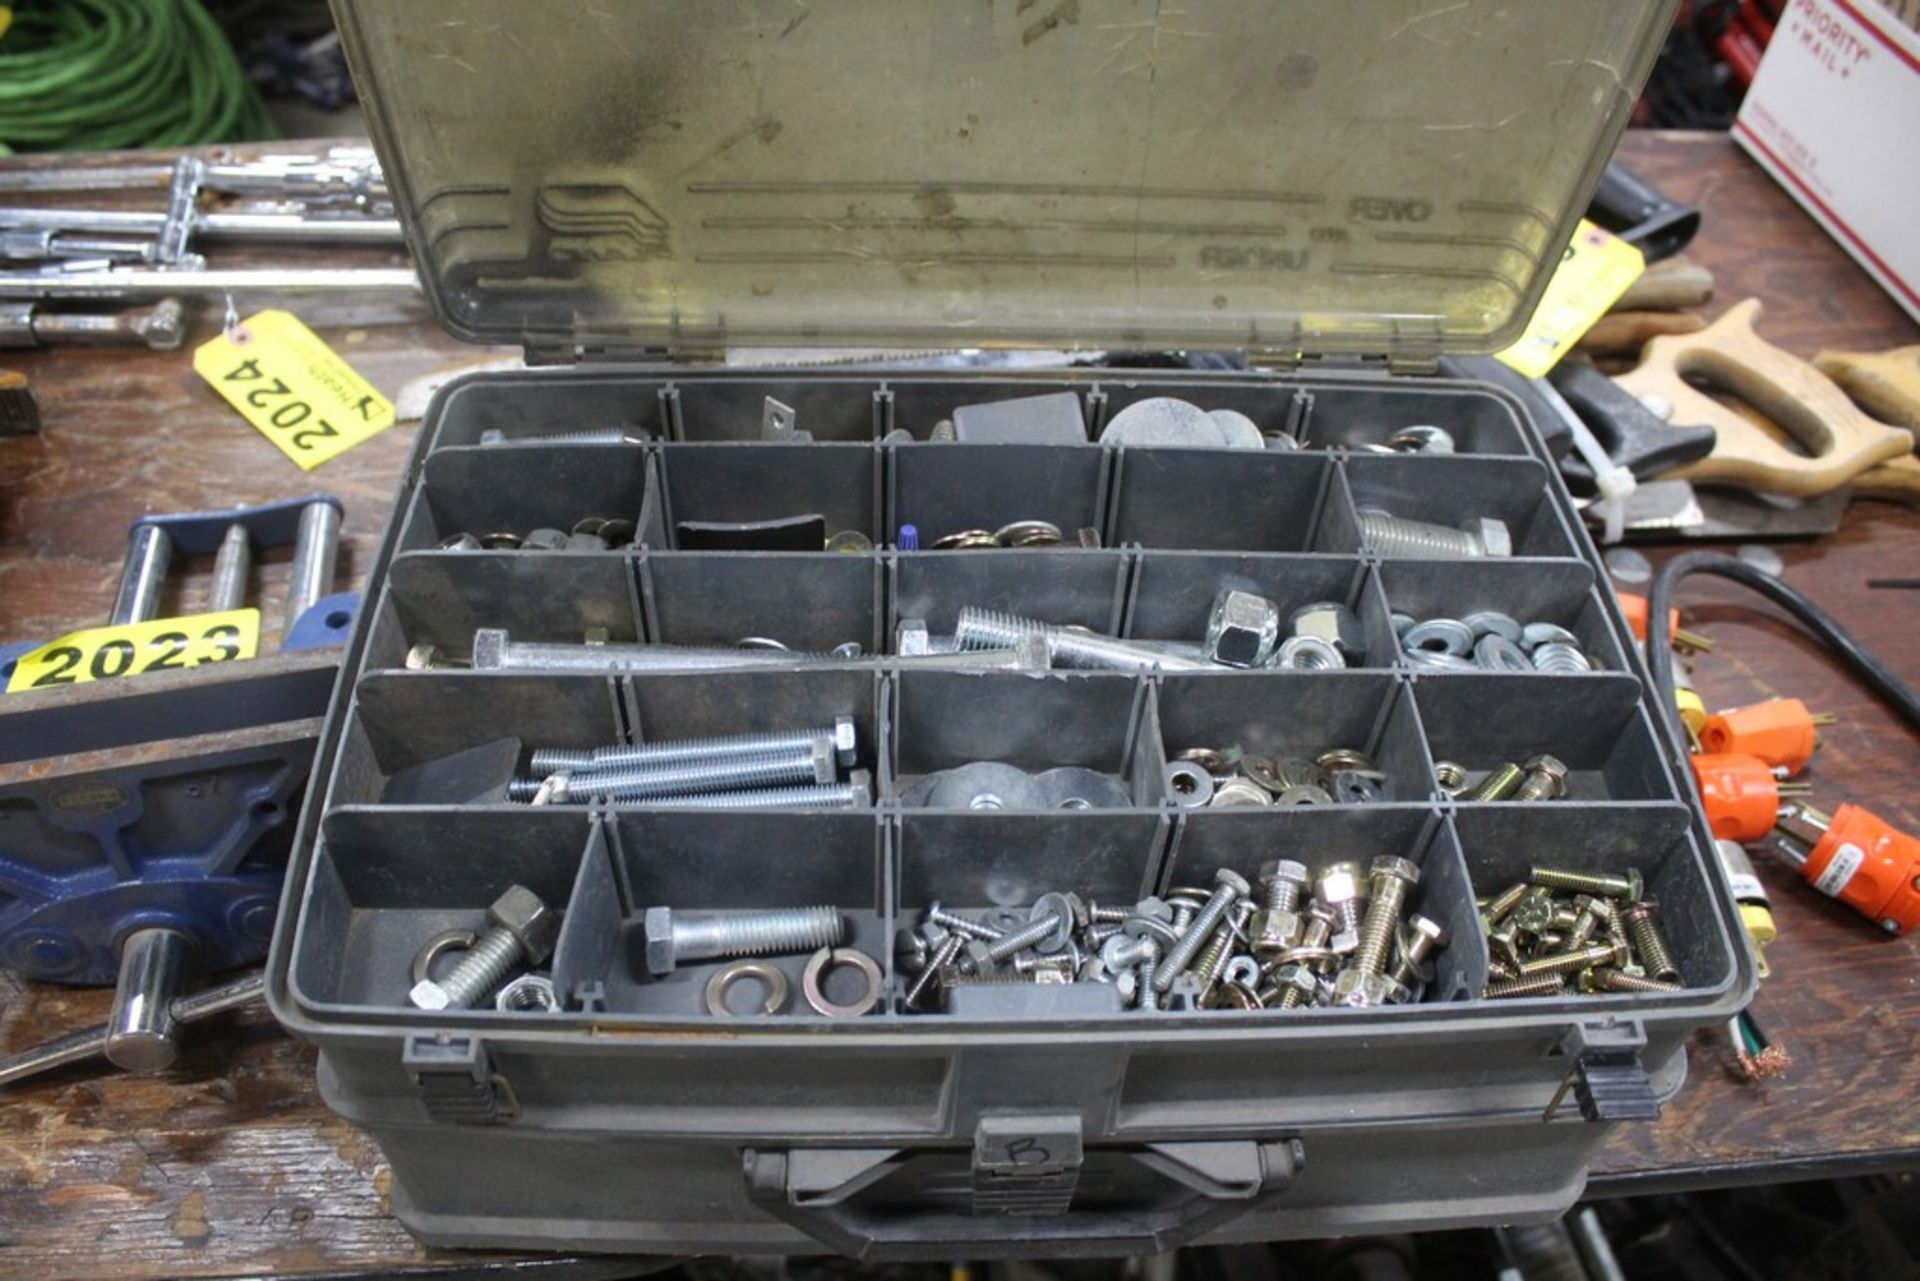 PLANO OVER AND UNDER PARTS CARRYING CASE - Image 2 of 2